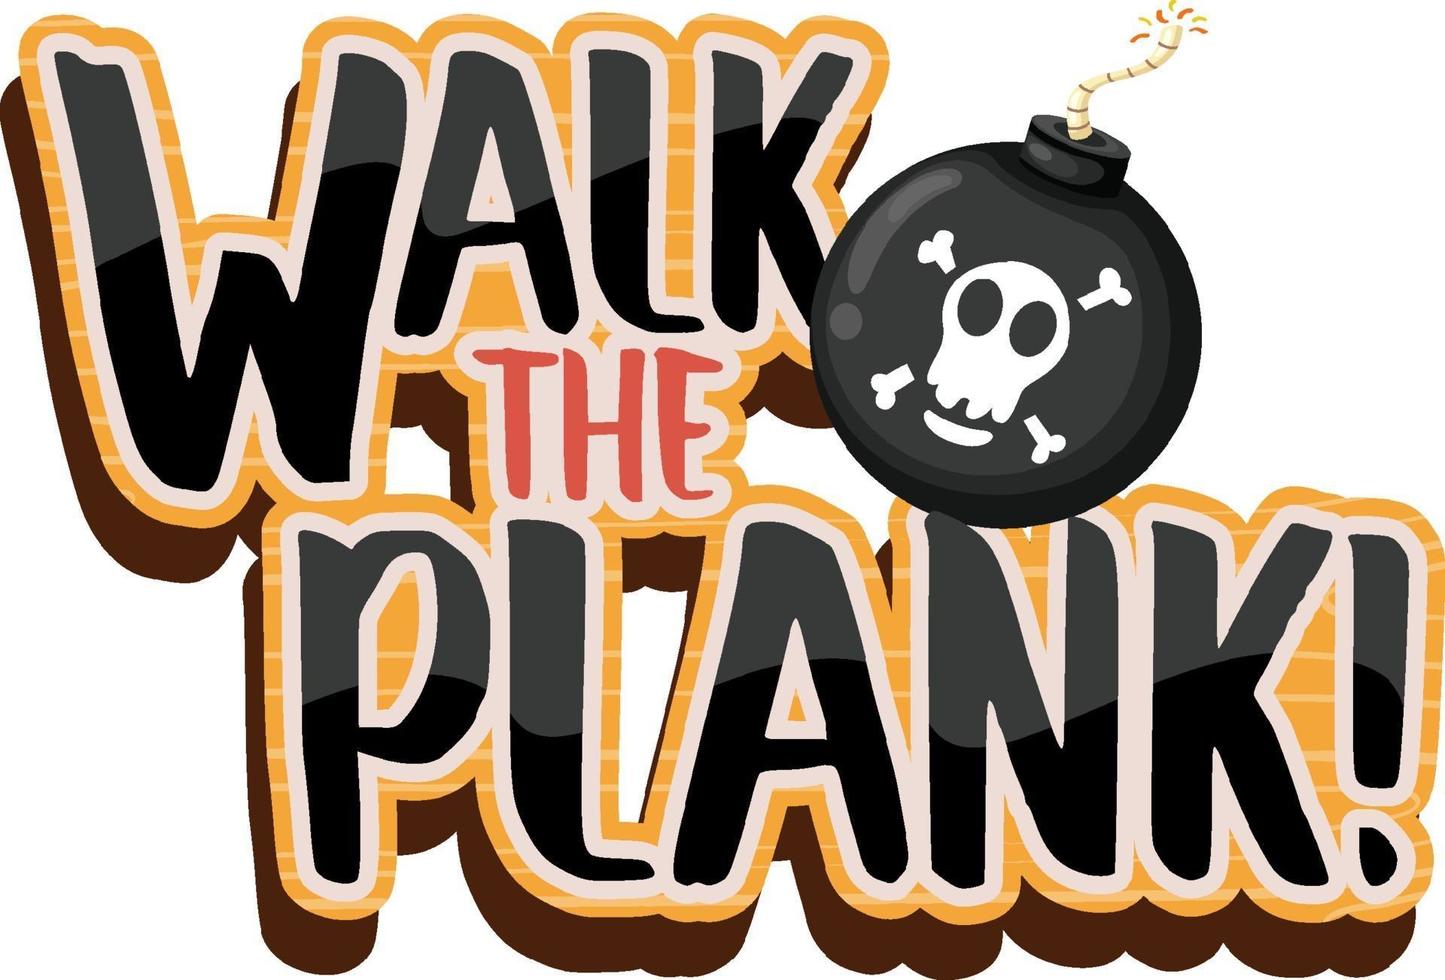 Pirate concept with walk the plank font banner on white background vector